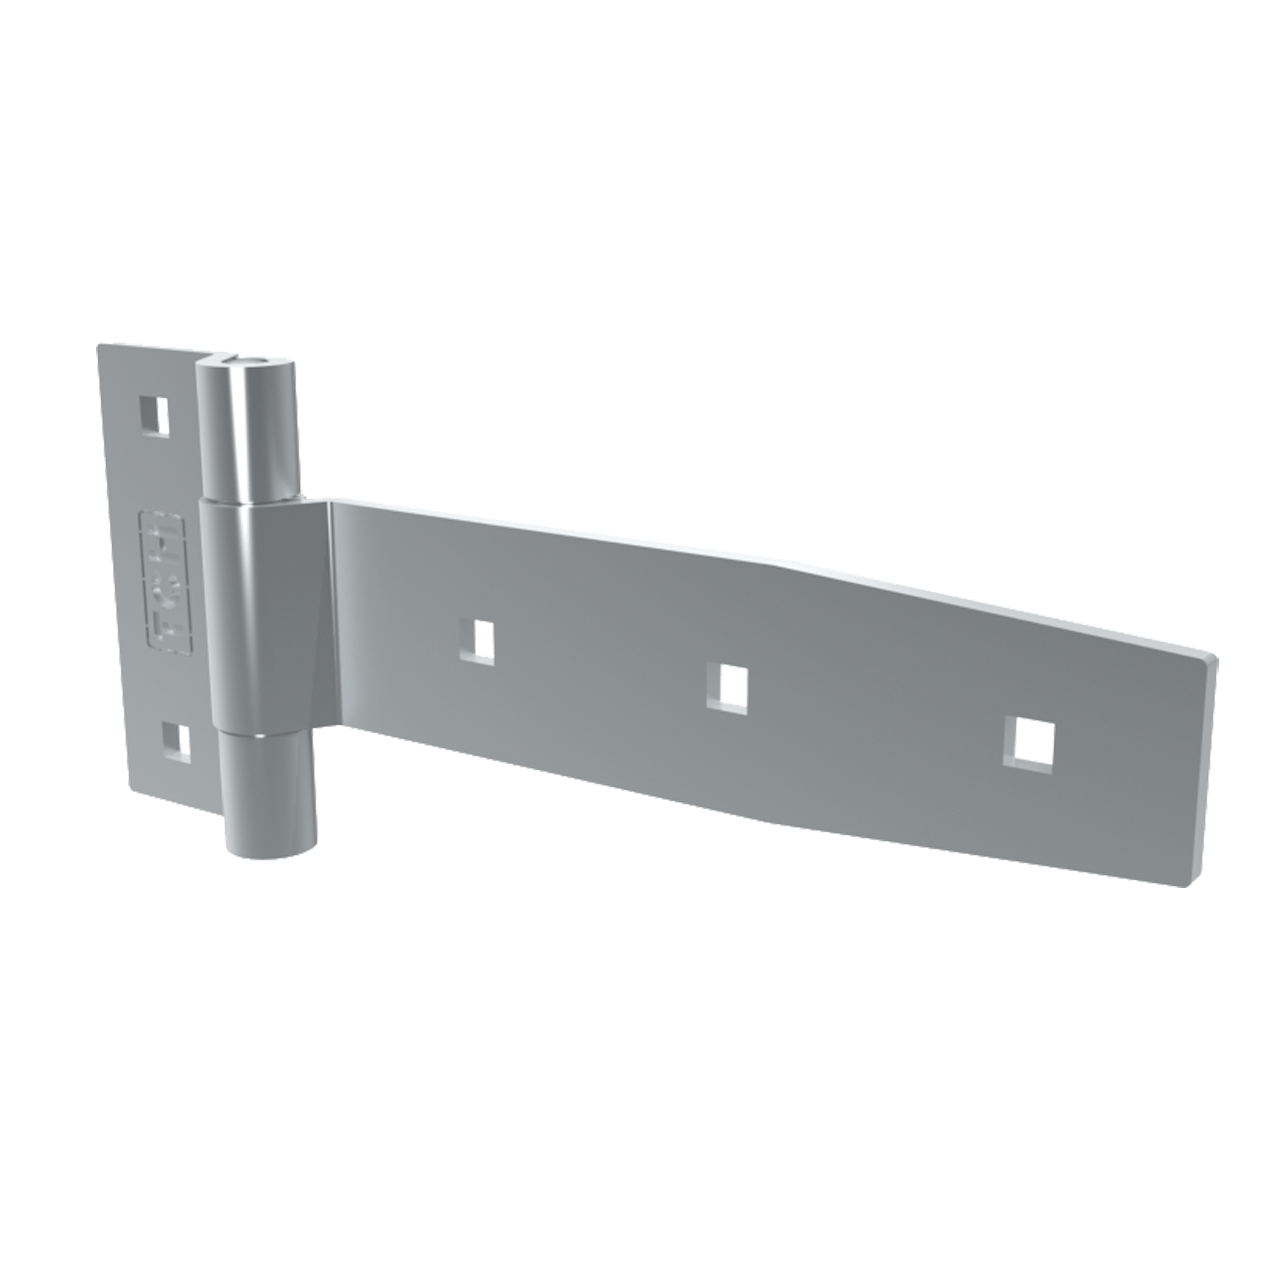 8" Polished Stainless Steel Strap Hinge